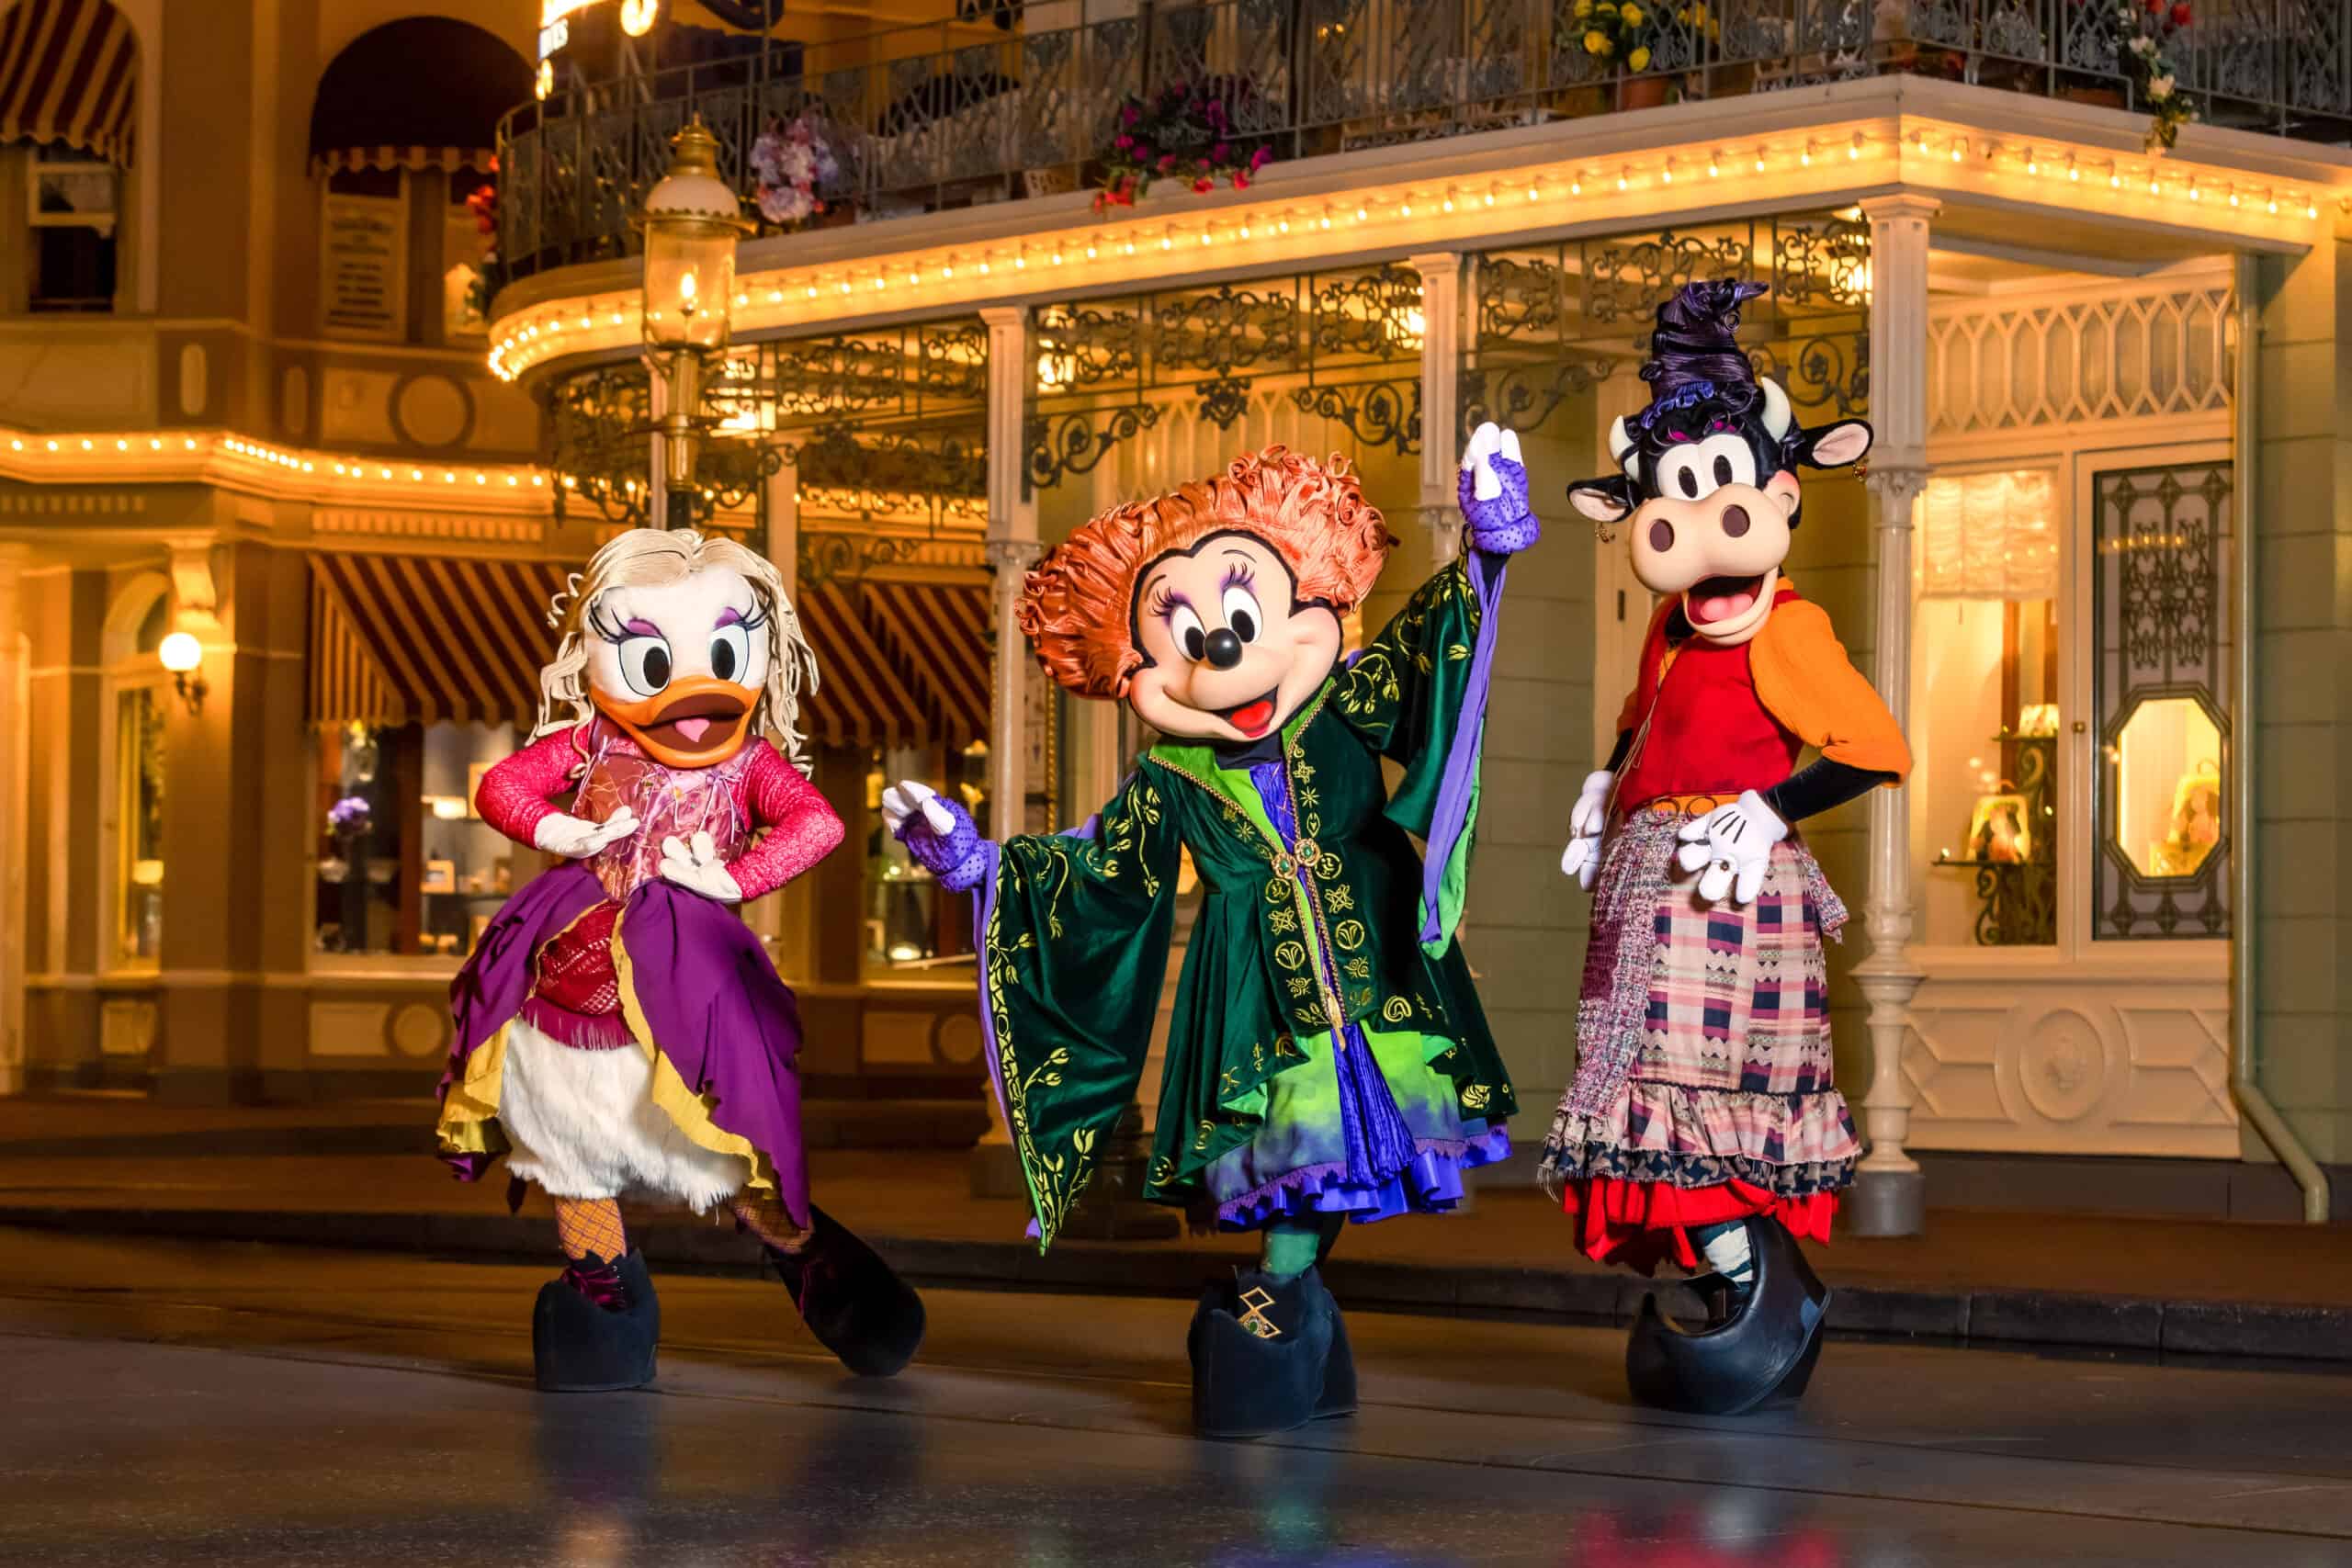 A Parent's Guide to Mickey's NotSoScary Halloween Party